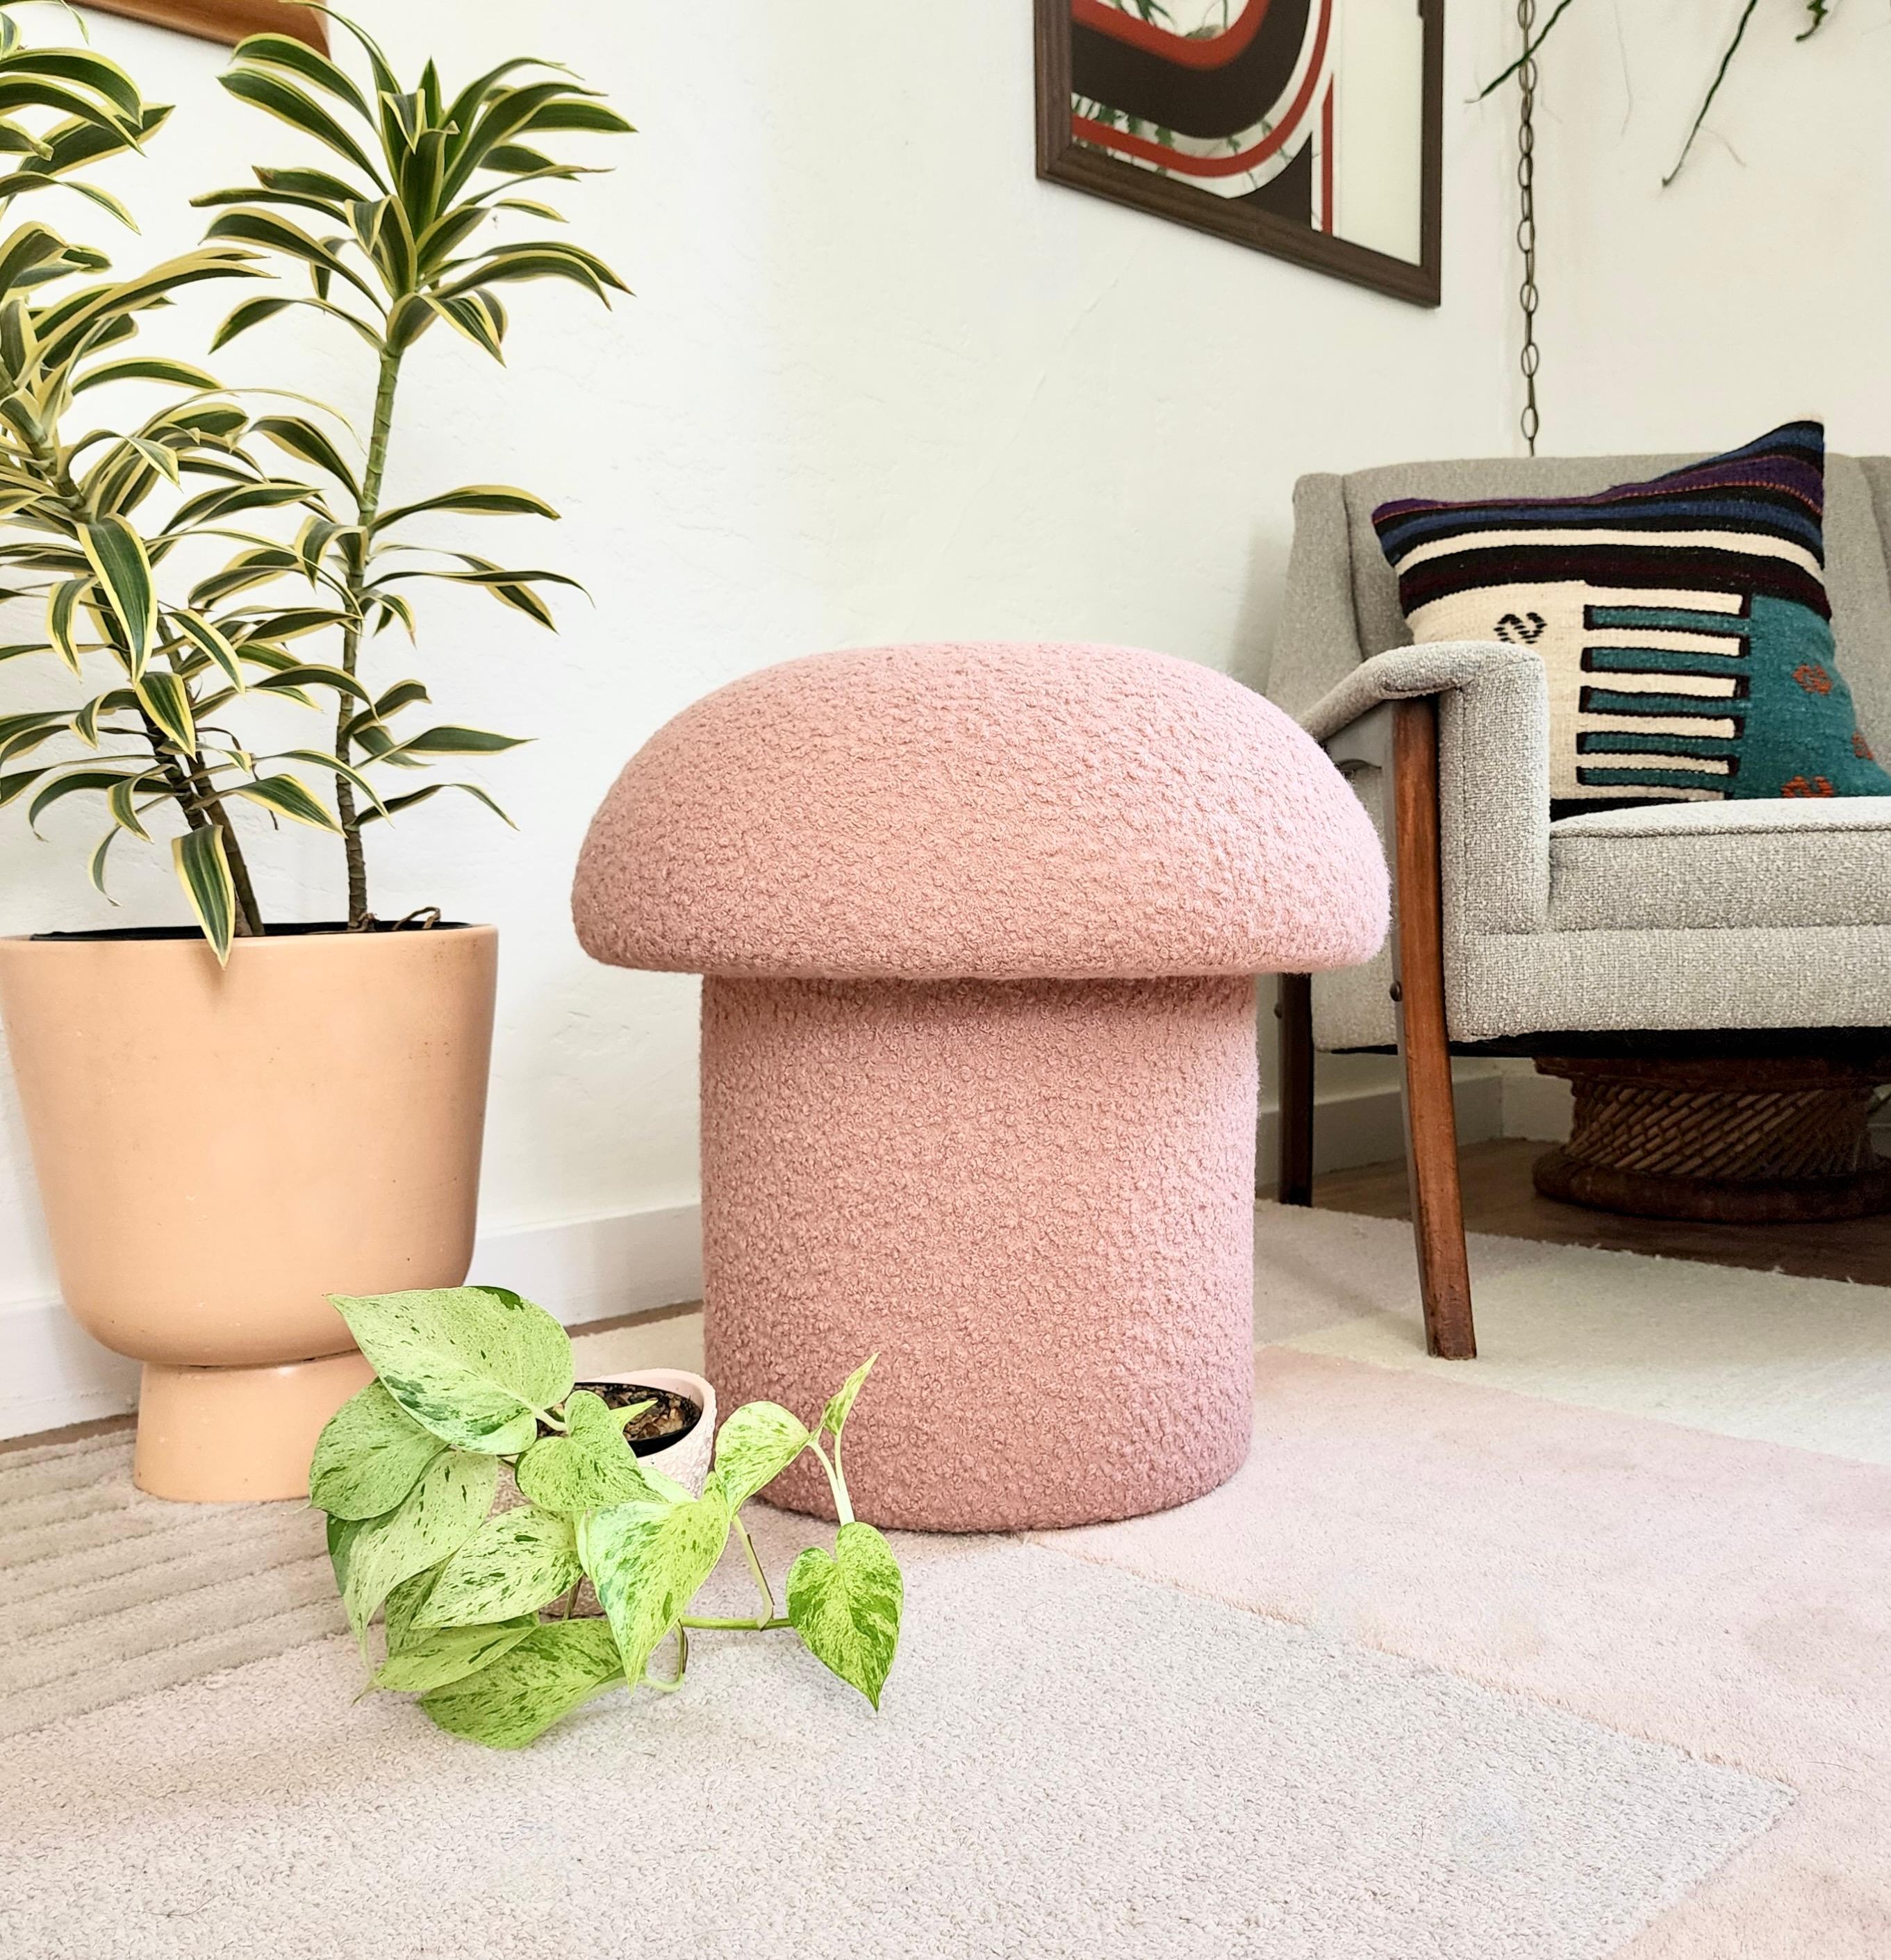 A handmade mushroom shaped stool, upholstered in a light pink colored curly boucle fabric. Perfect for using as a footstool or extra occasional seating. A comfortable cushioned seat and sculptural accent piece.
Mushroom ottomans are made to order,